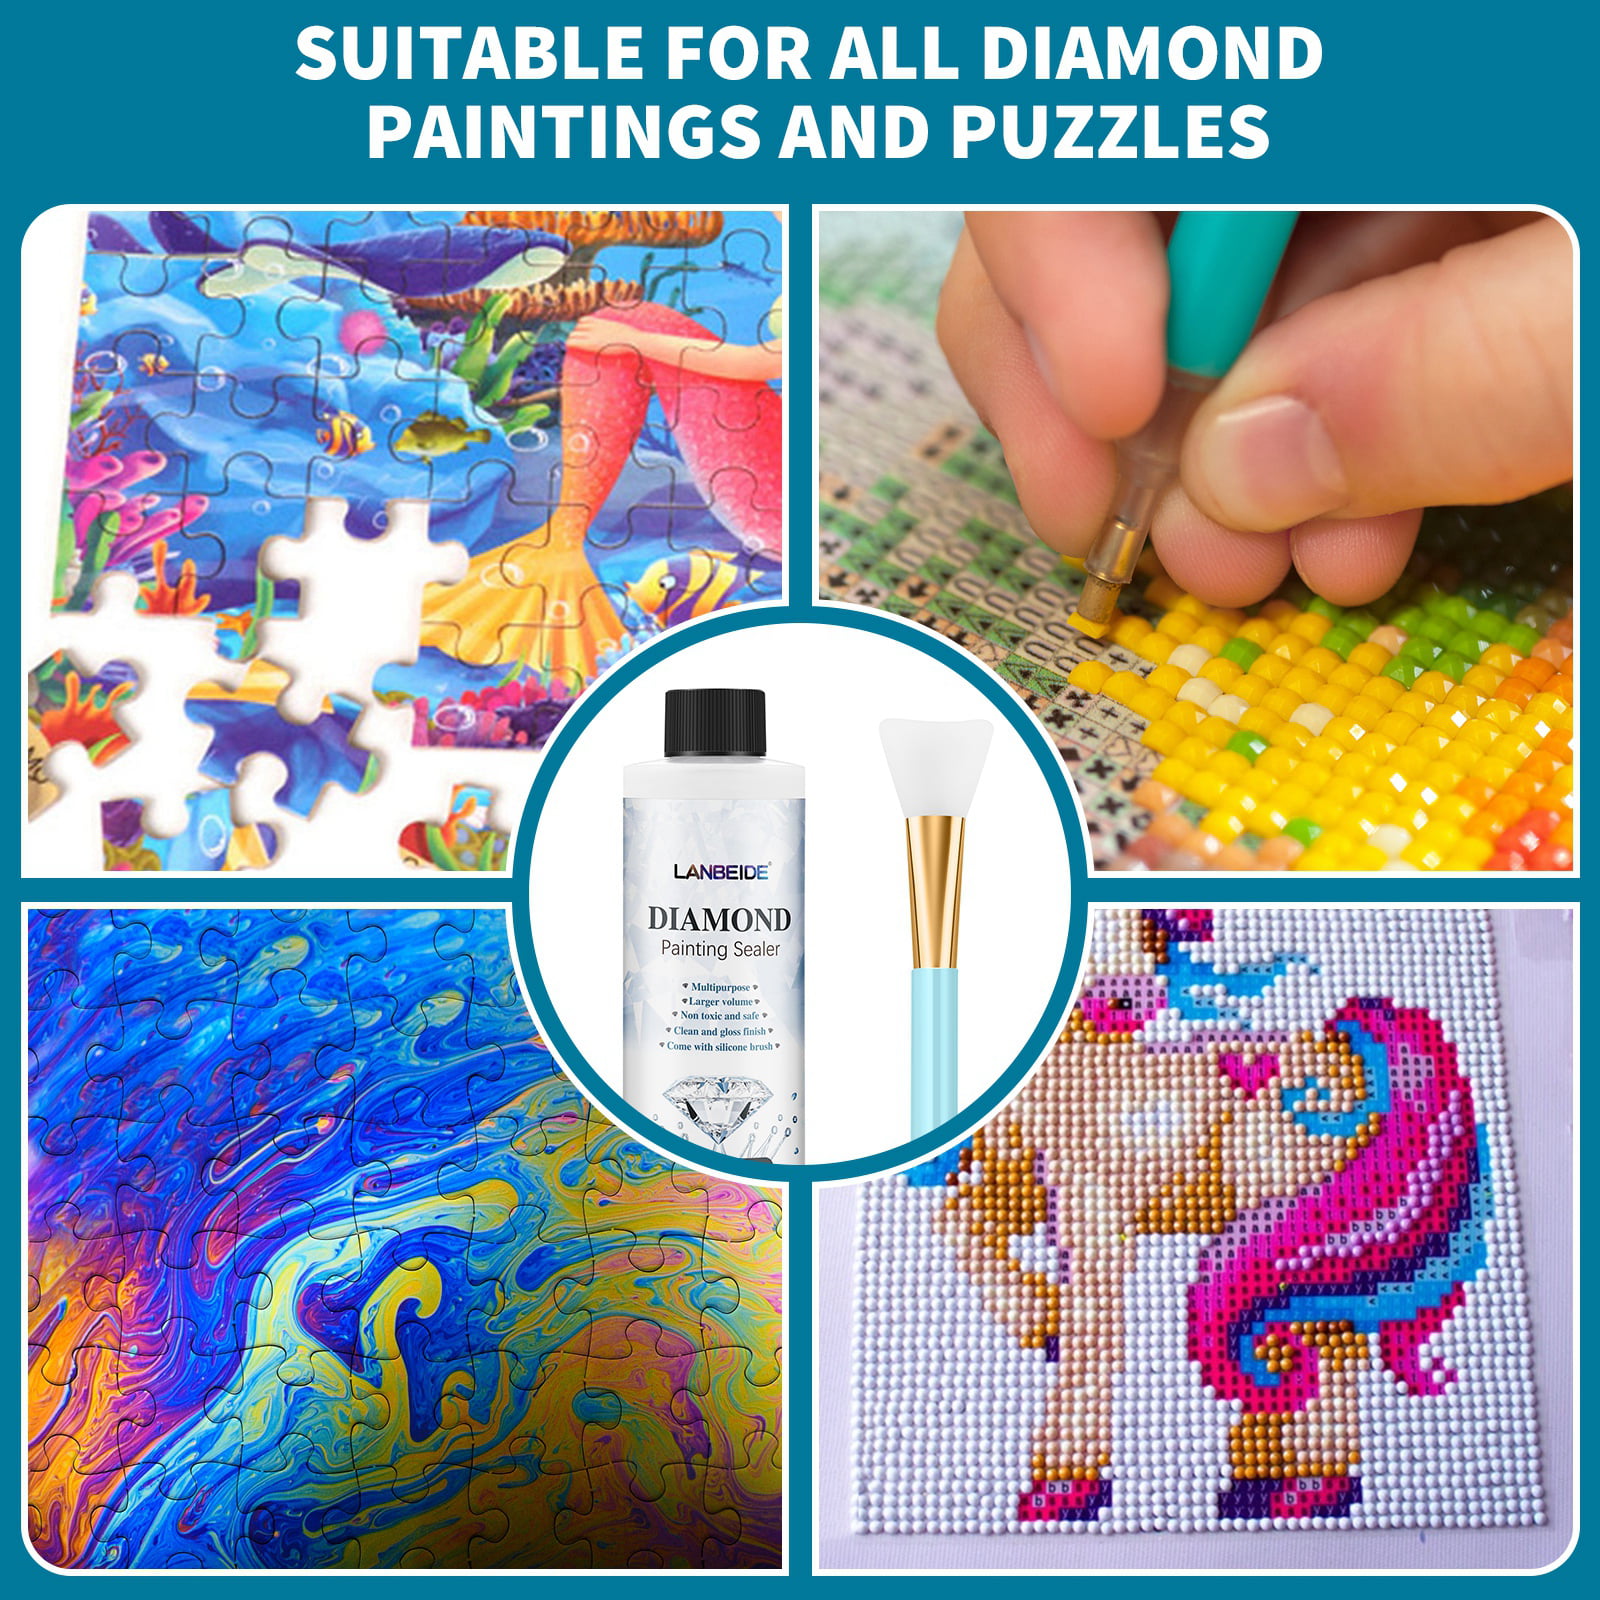  LANBEIDE Updated Diamond Painting Sealer 200ML with Silicone  Brush, 5D Diamond Painting Glue Sealer Permanent Hold & Shine Effect  Conserver for Jigsaw Puzzles (7 OZ) : Arts, Crafts & Sewing